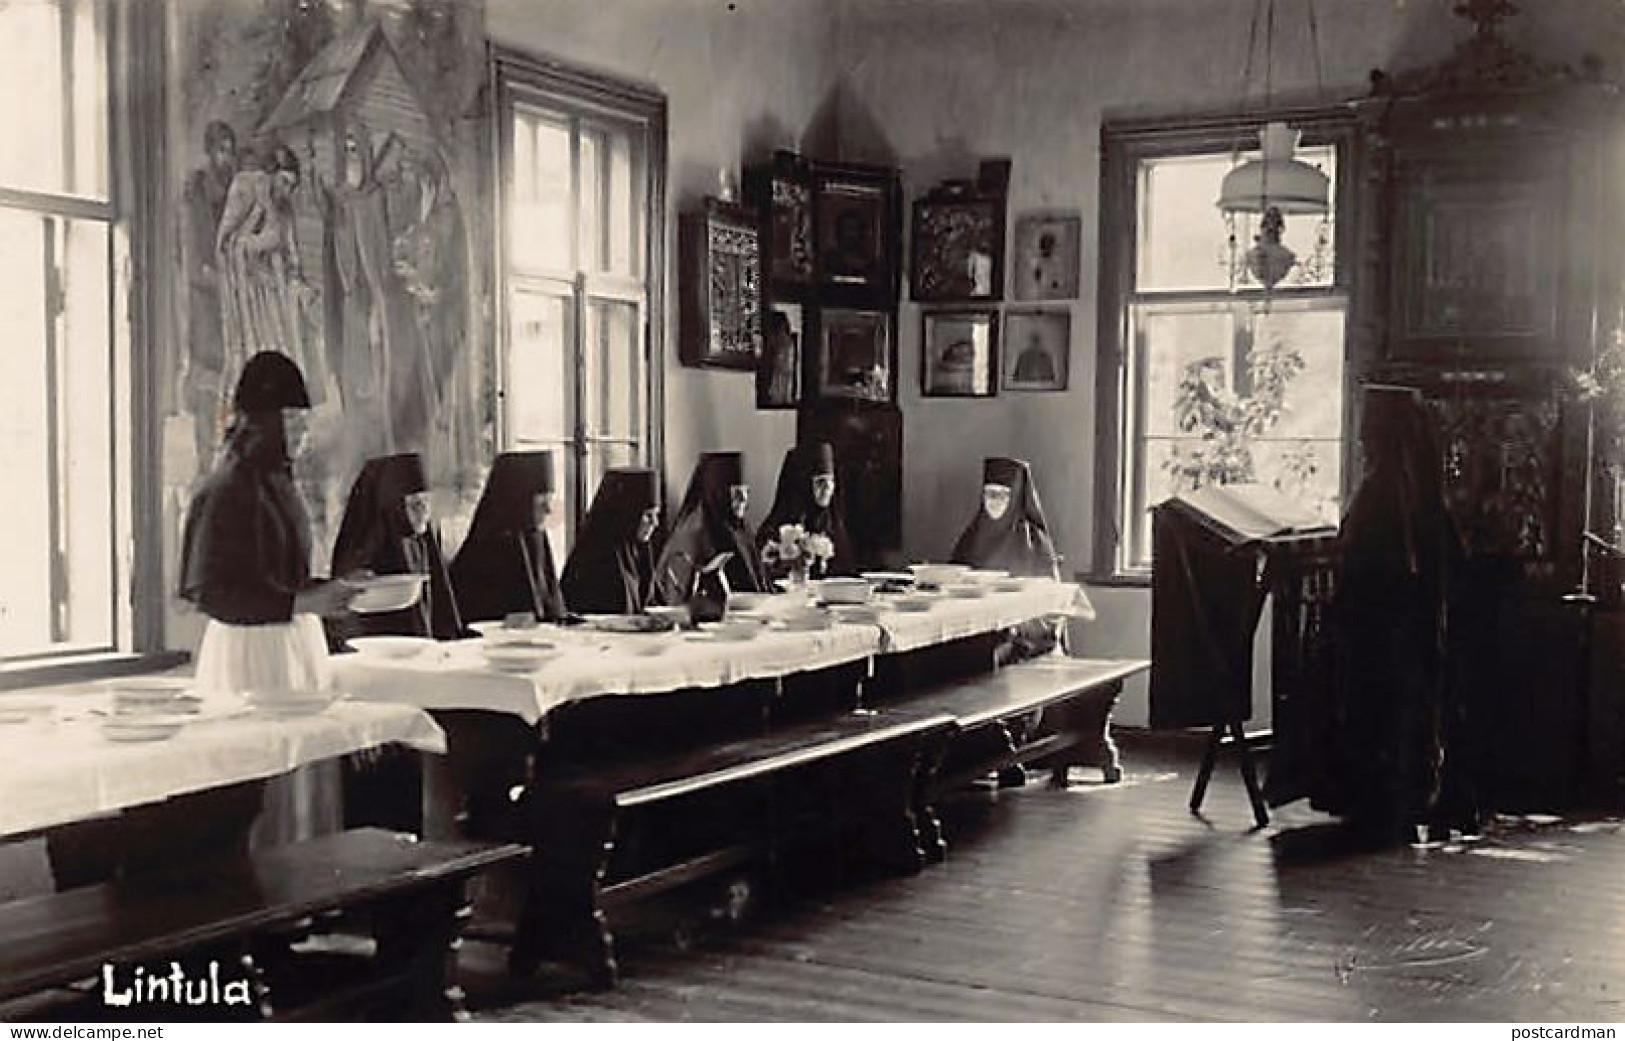 Finland - PALOKKI - Lintula Holy Trinity Convent - REAL PHOTO - Publ. Unknown  - Finland